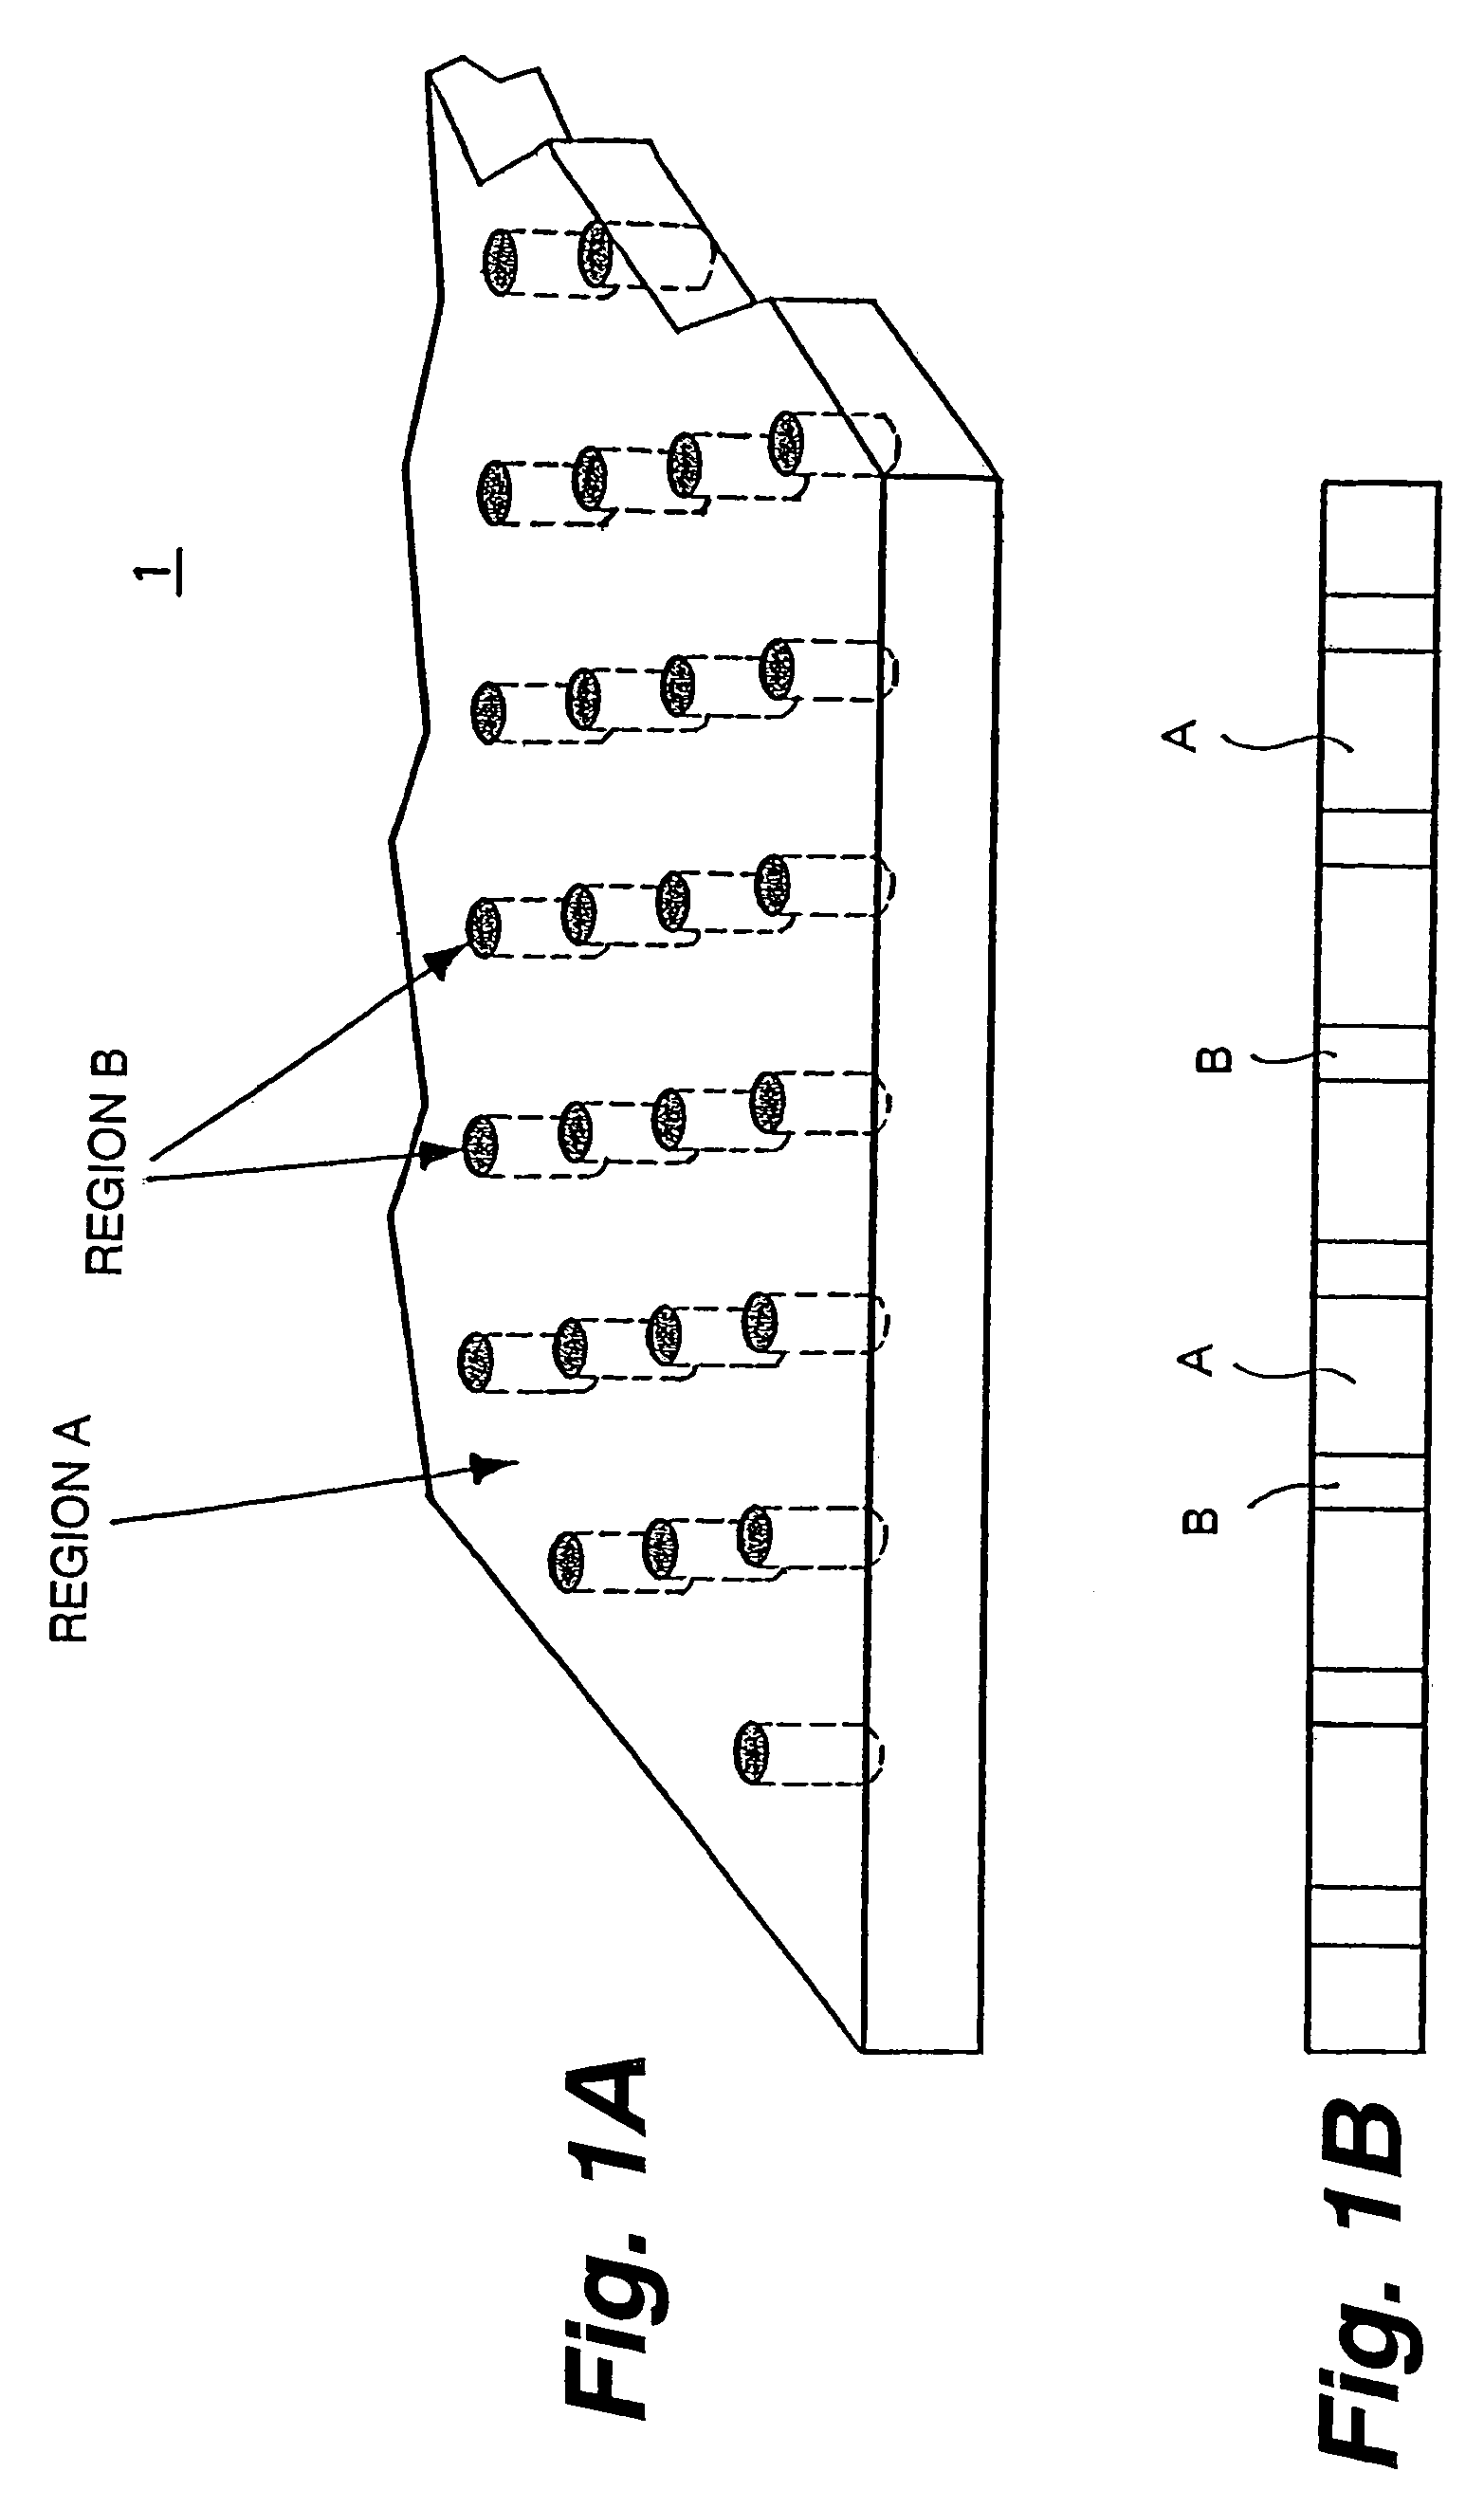 Method of manufacturing a semiconductor light emitting device, semiconductor light emitting device, method of manufacturing a semiconductor device, semiconductor device, method of manufacturing a device, and device